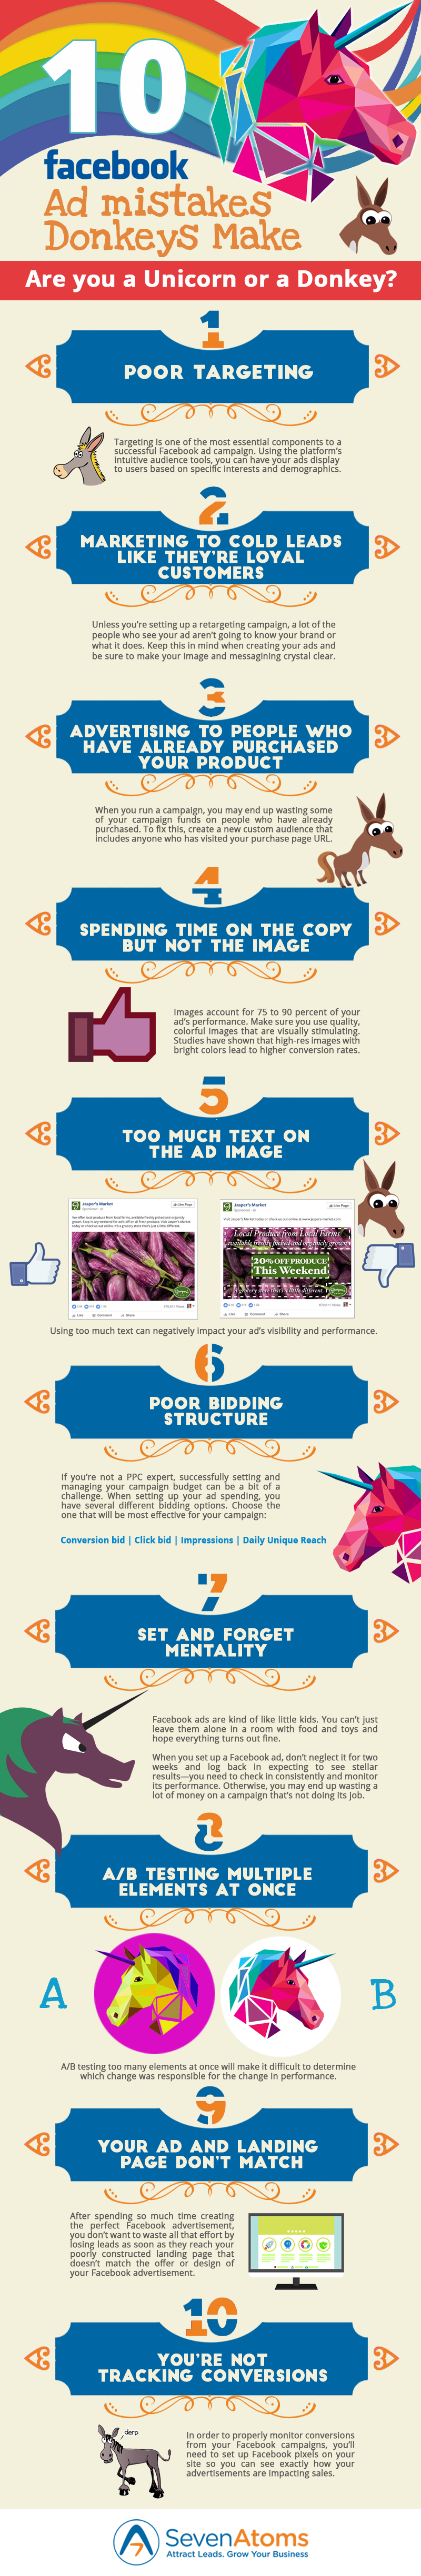 10-Facebook-Ad-Mistakes-Donkeys-Makes-INFOGRAPHIC